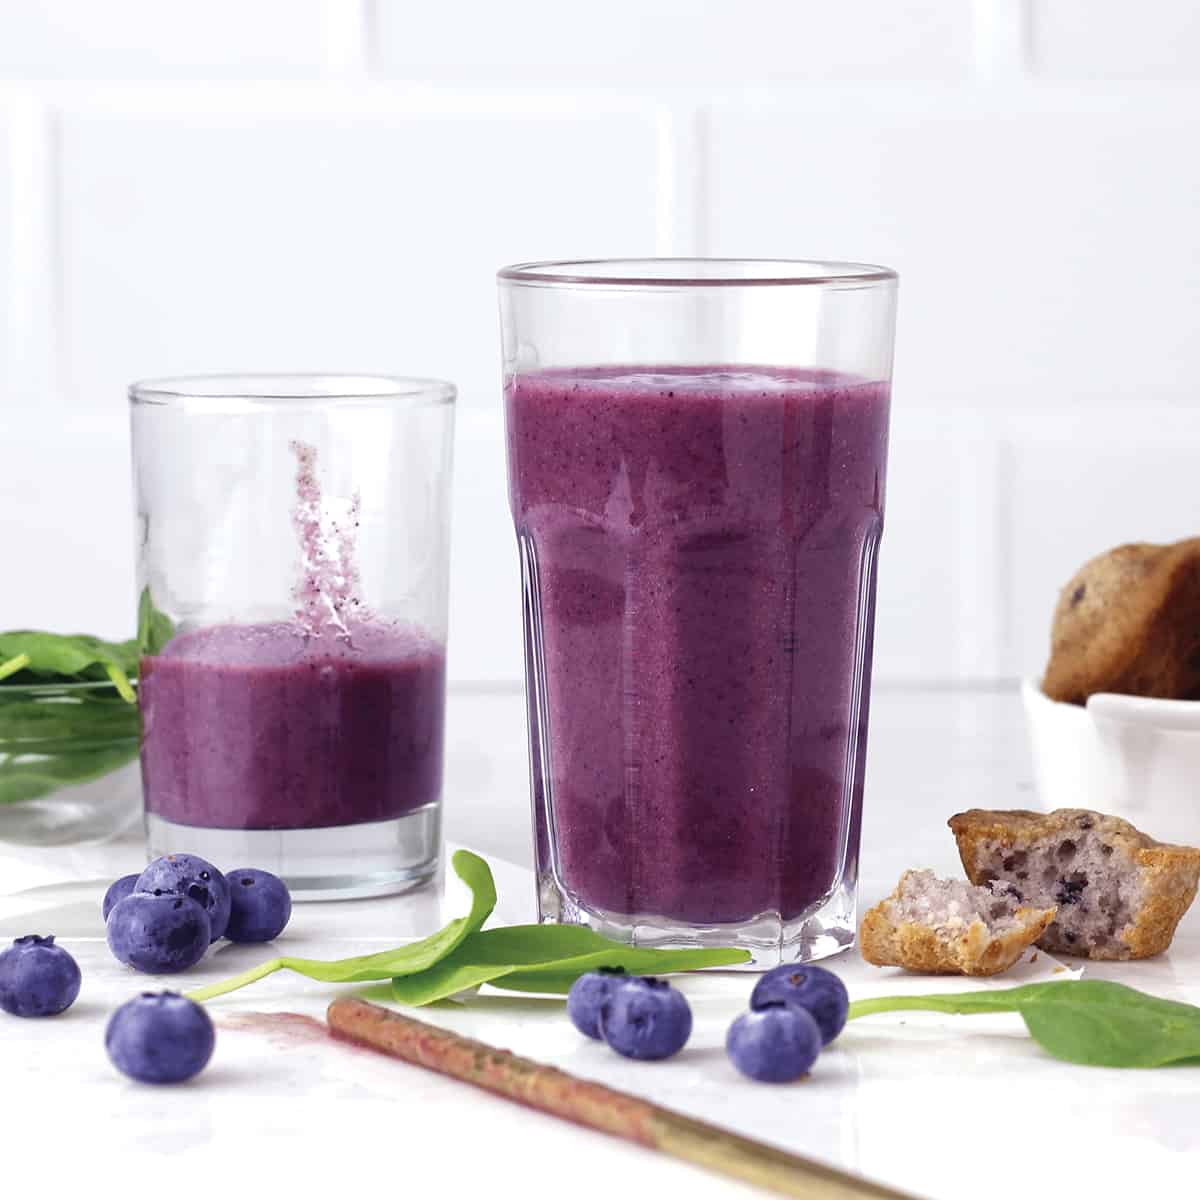 blueberry blackberry smoothie for foods that are purple.